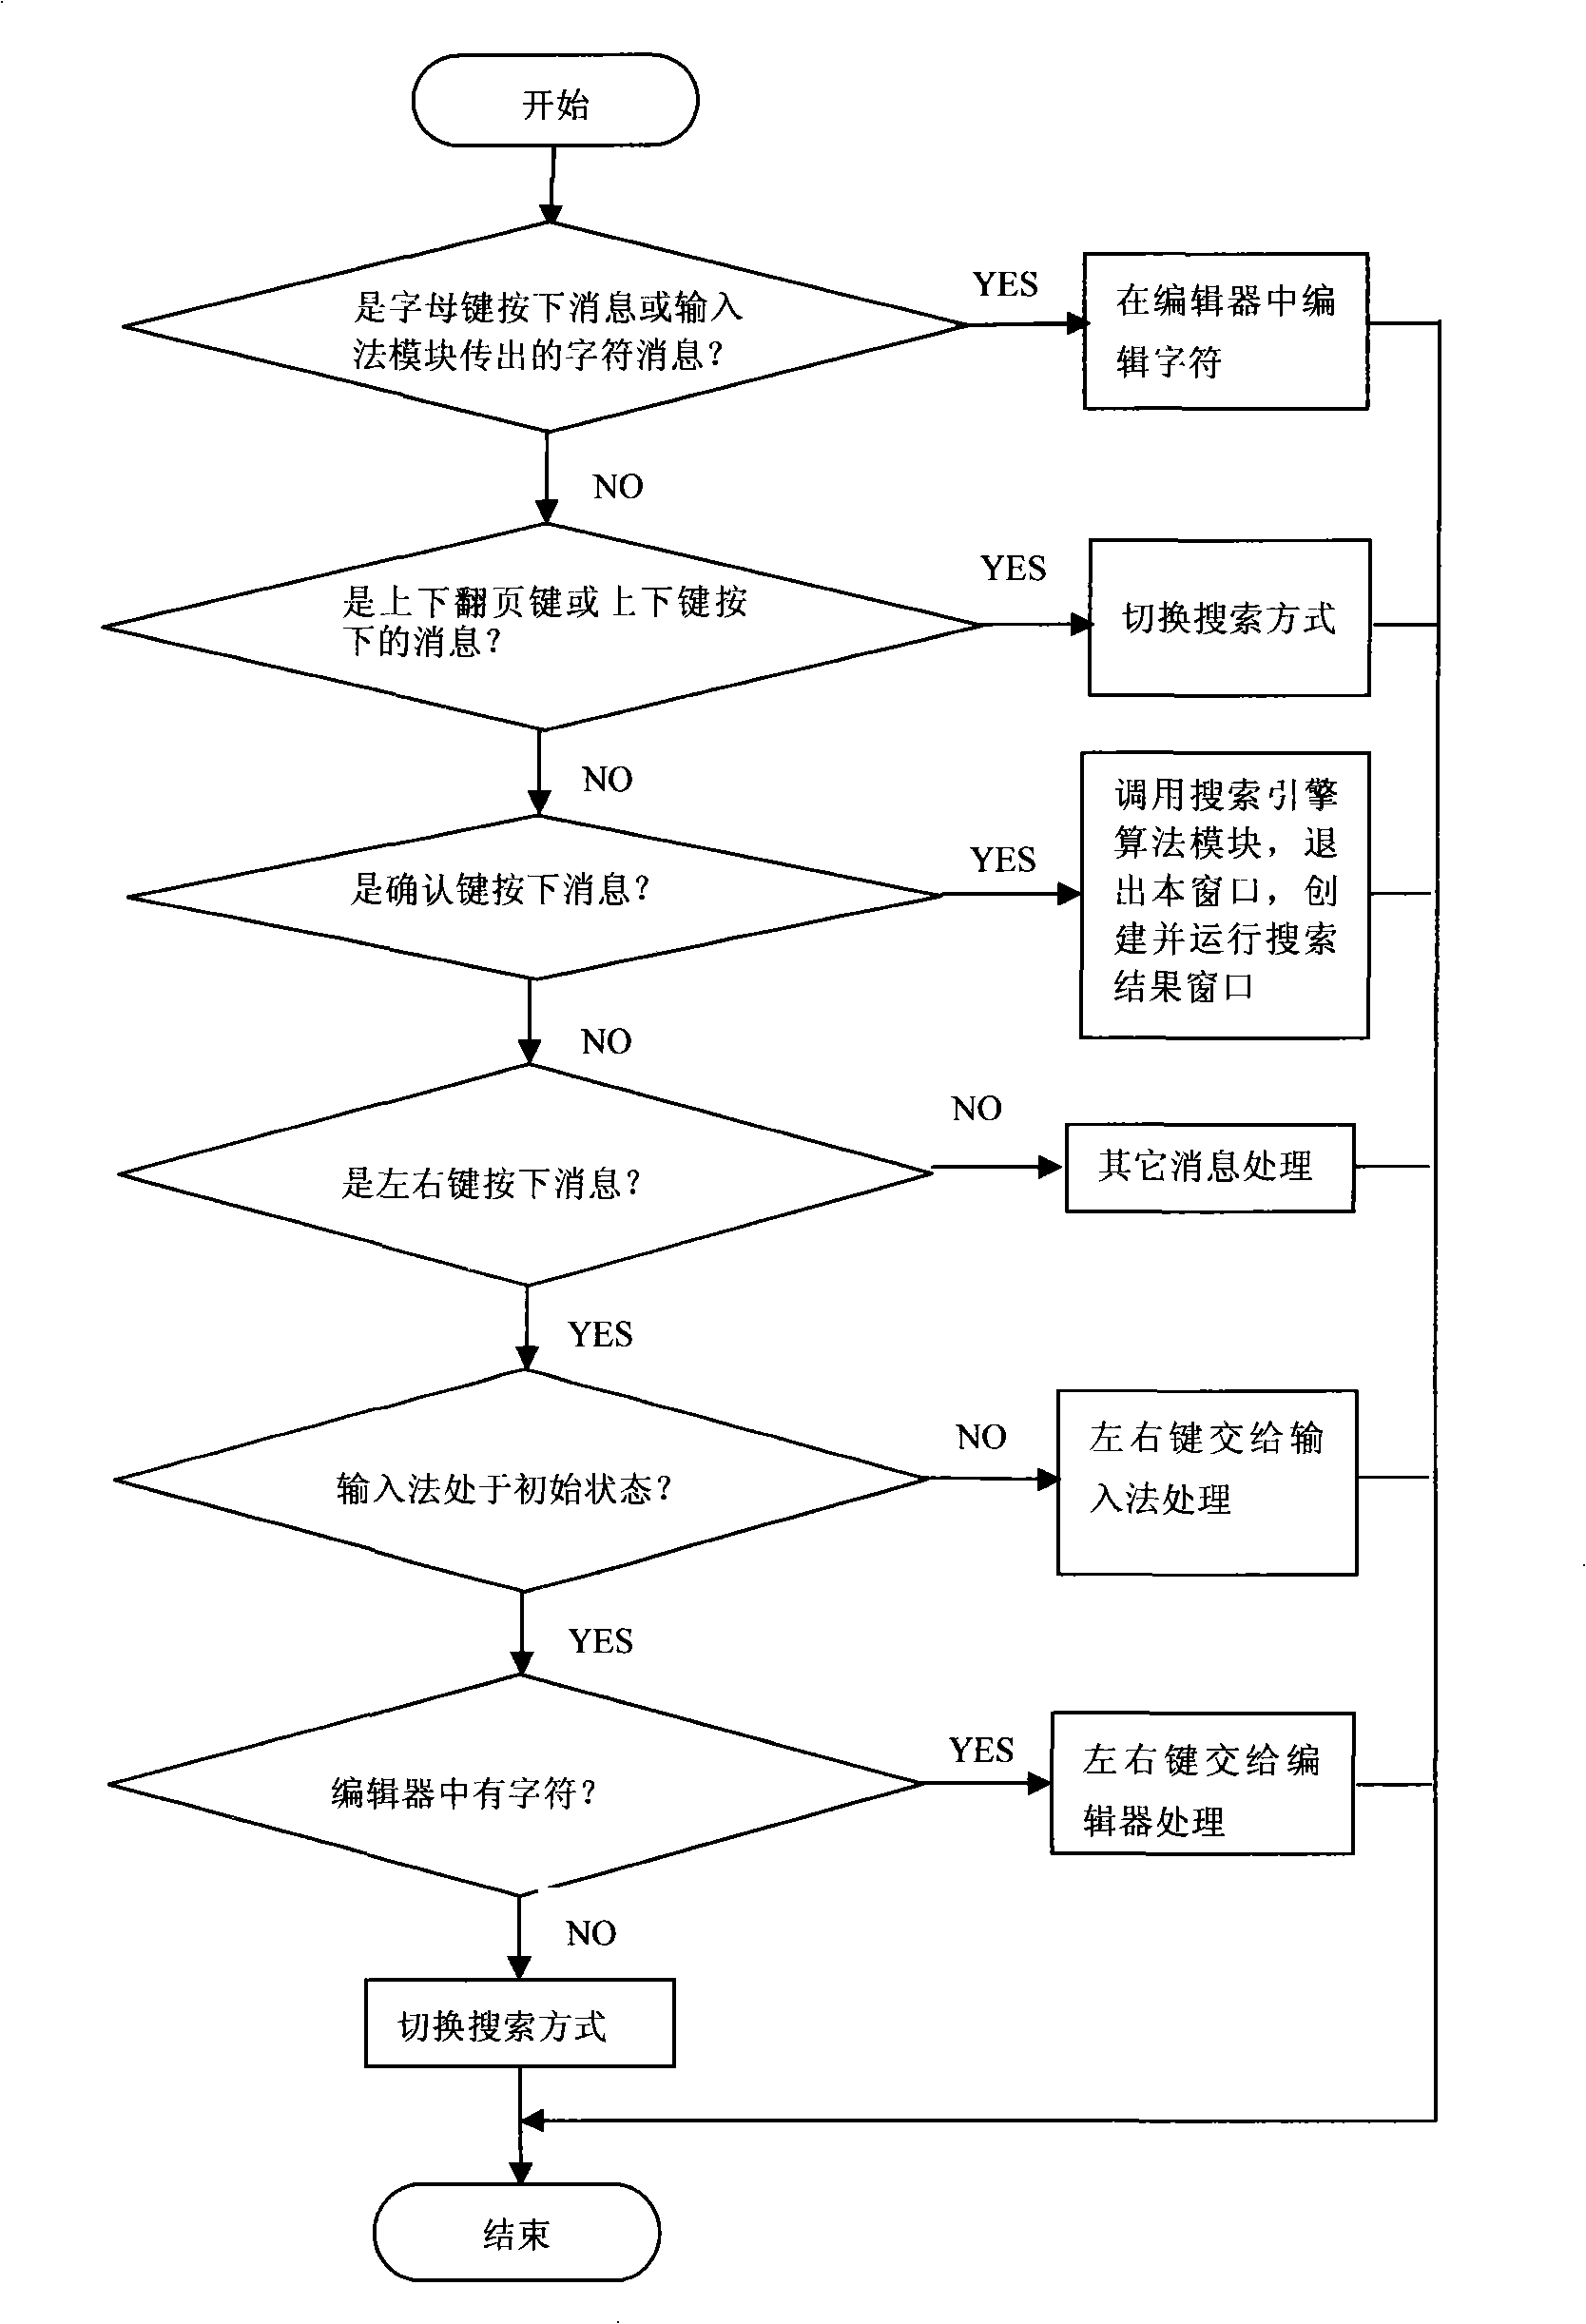 Search engine apparatus and method